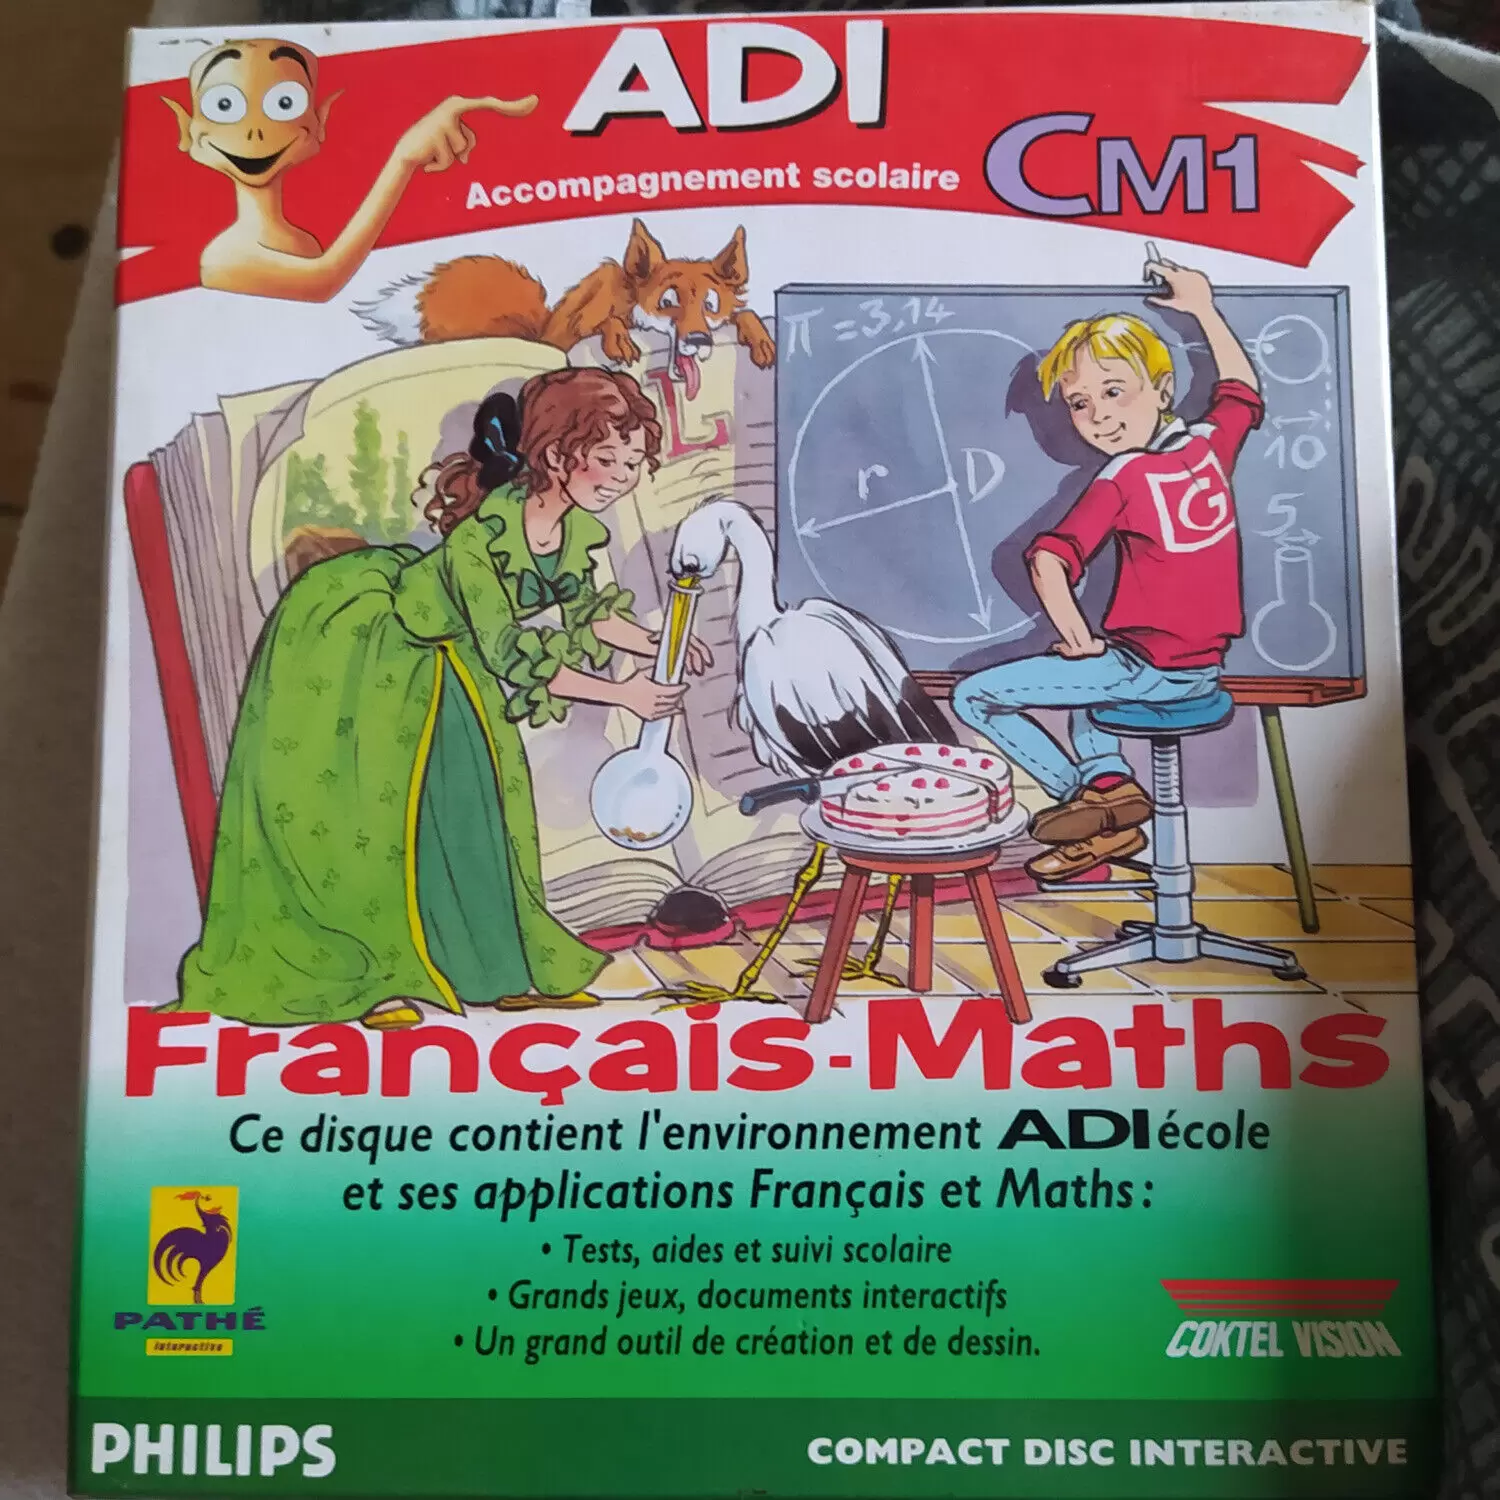 Philips CD-i - ADI accompagnement scolaire cm1